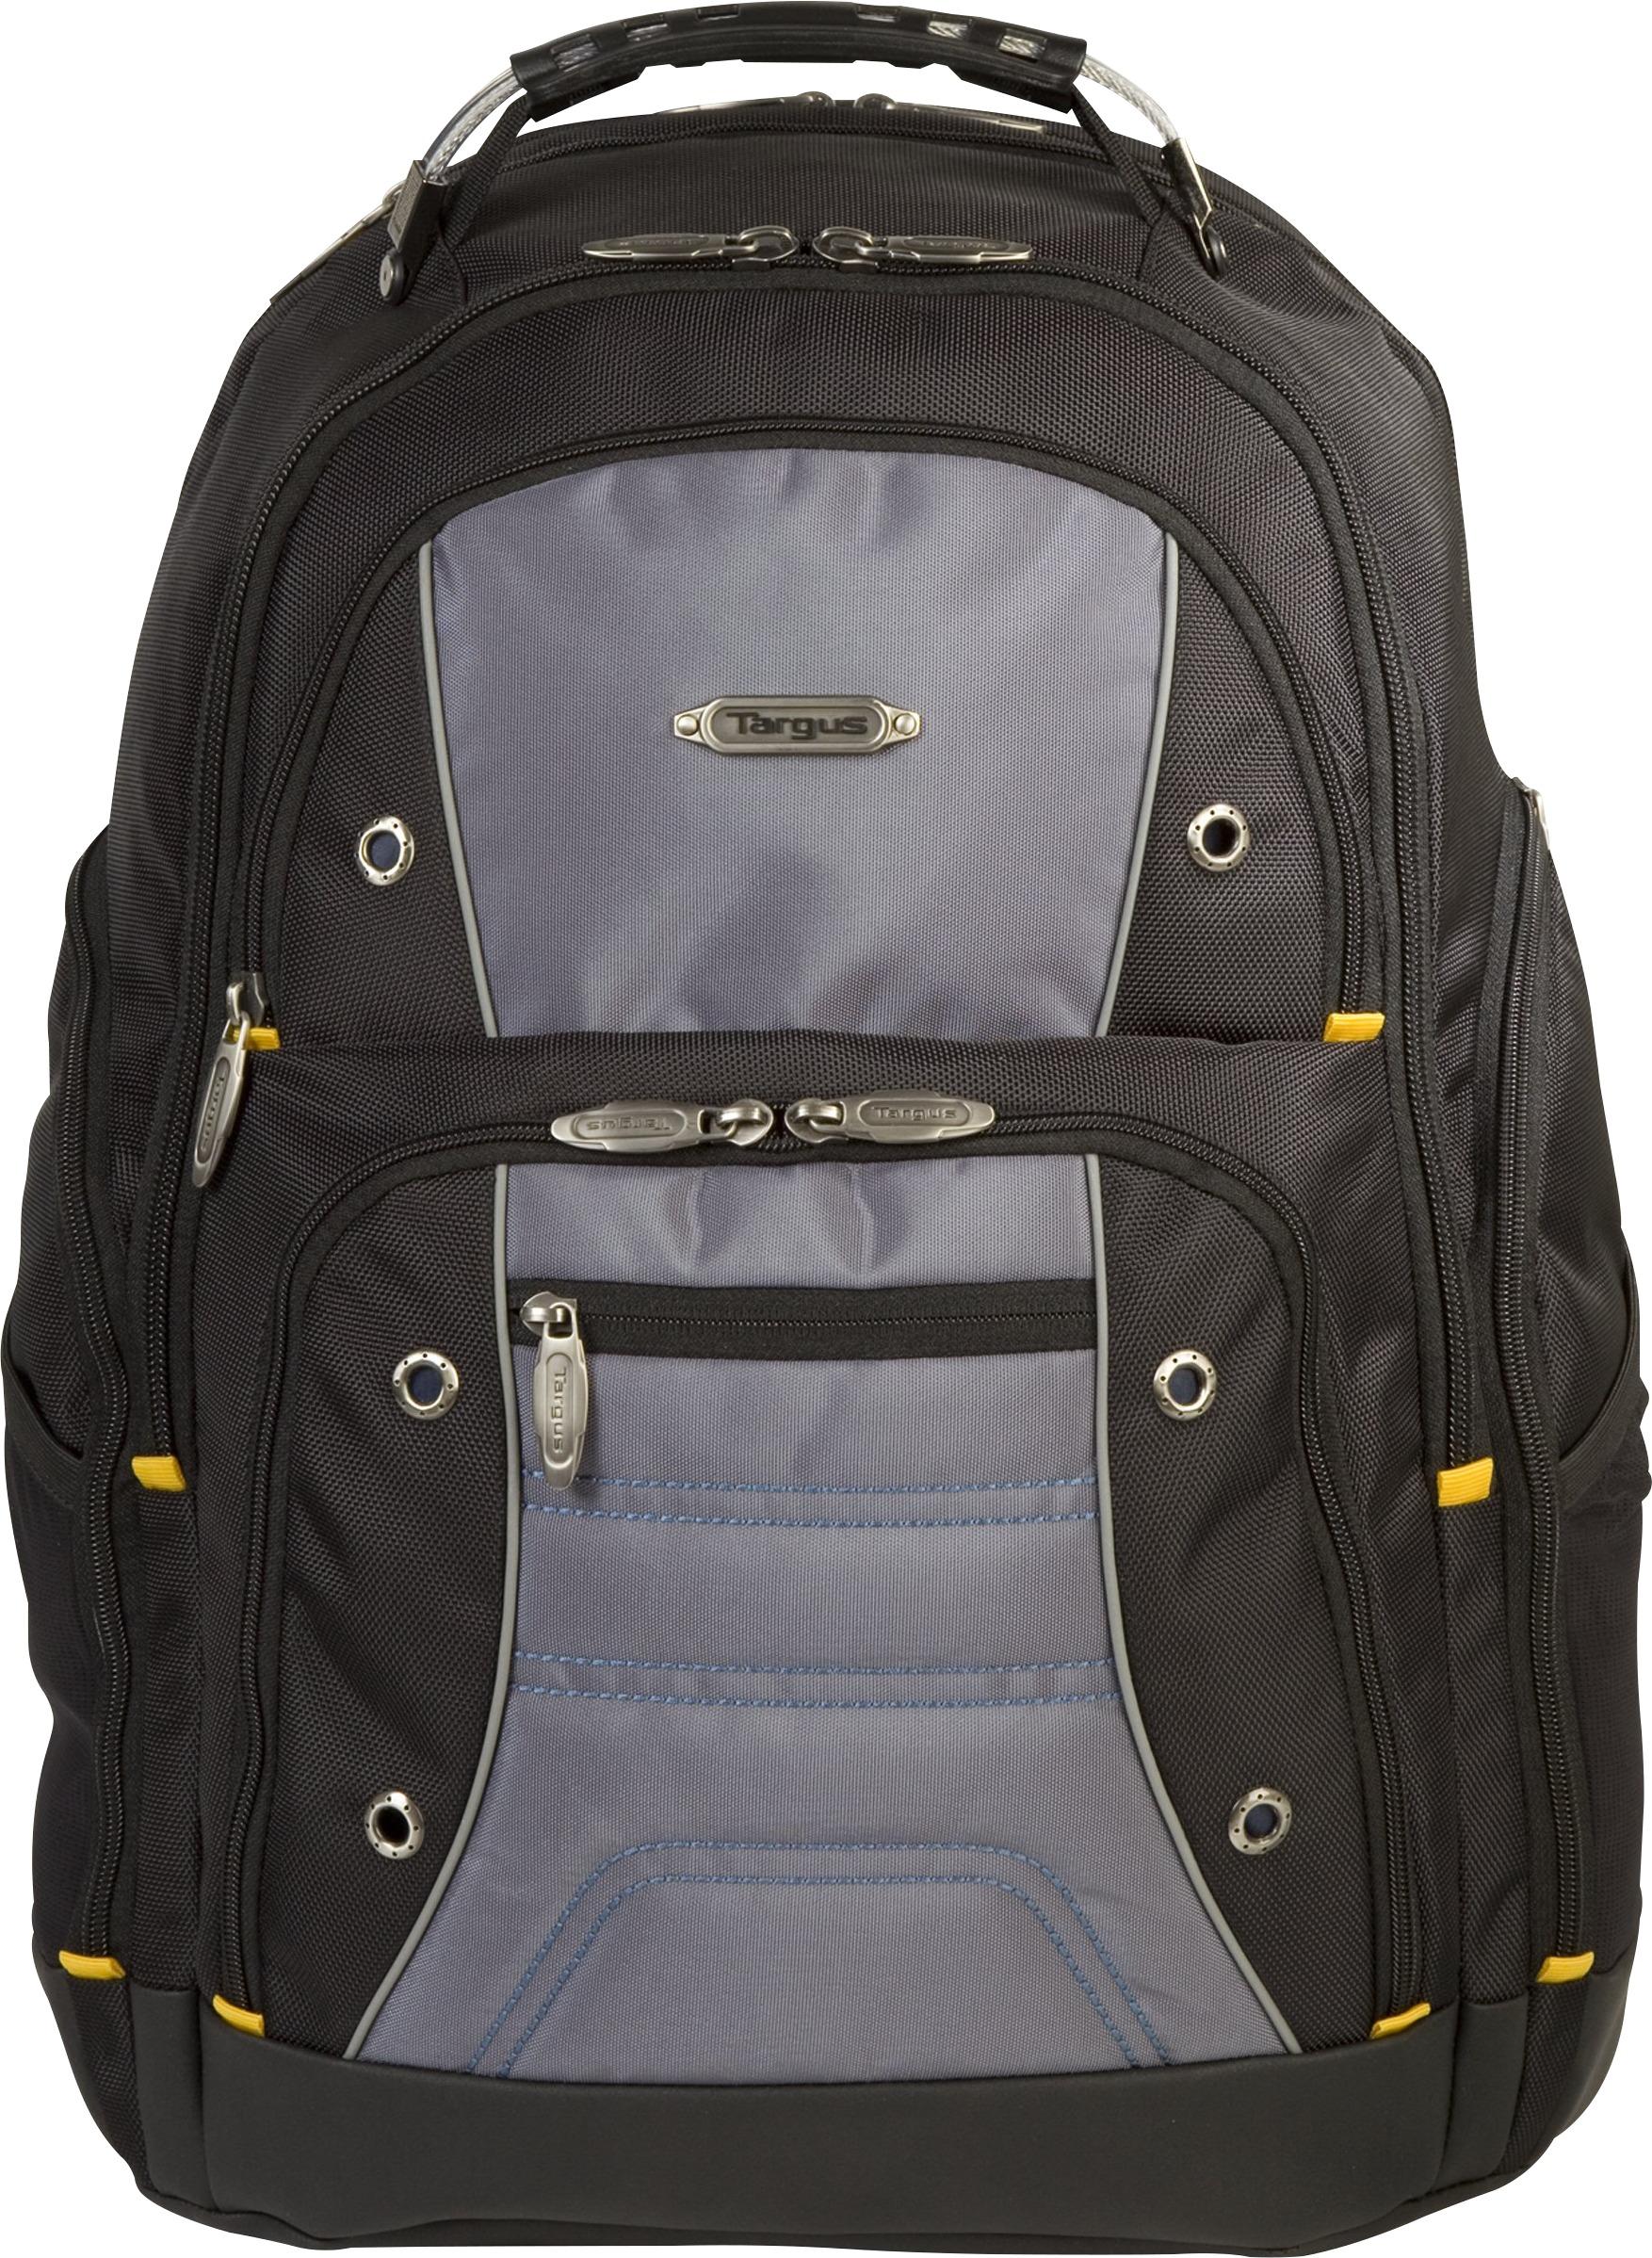 Customer Reviews: Targus Drifter II Laptop Backpack Gray with yellow ...